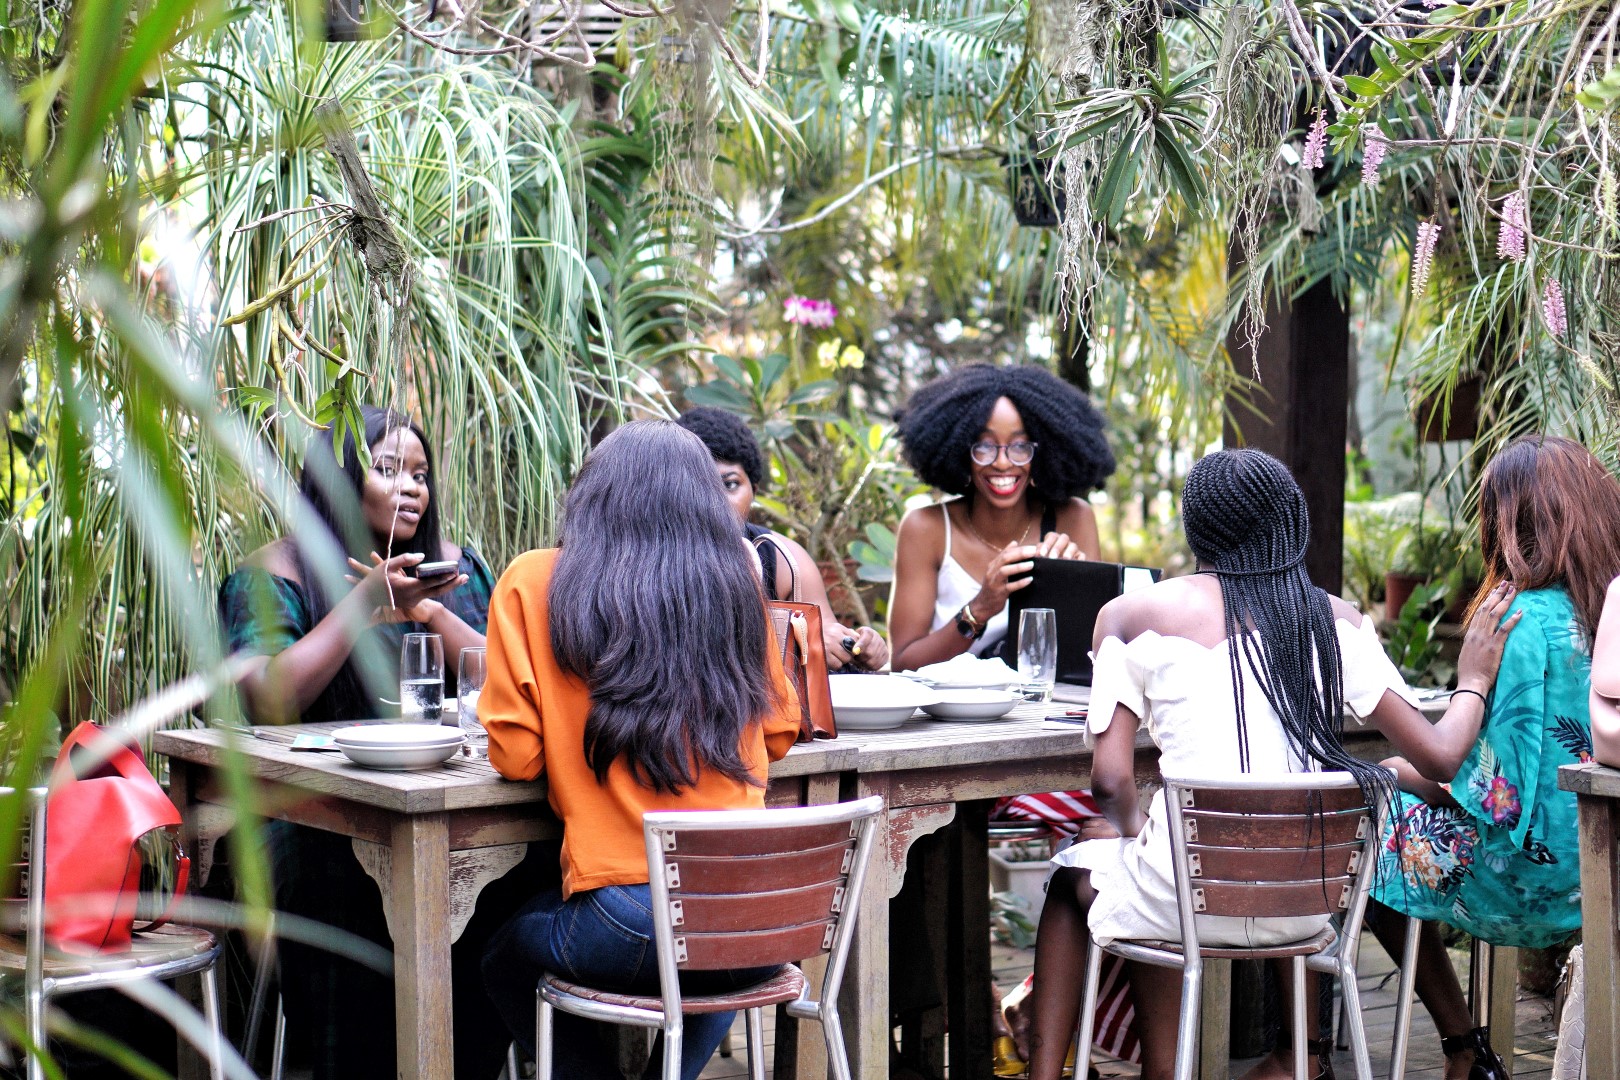 Cassie daves galentines day out at orchid bistro restaurant in ikeja